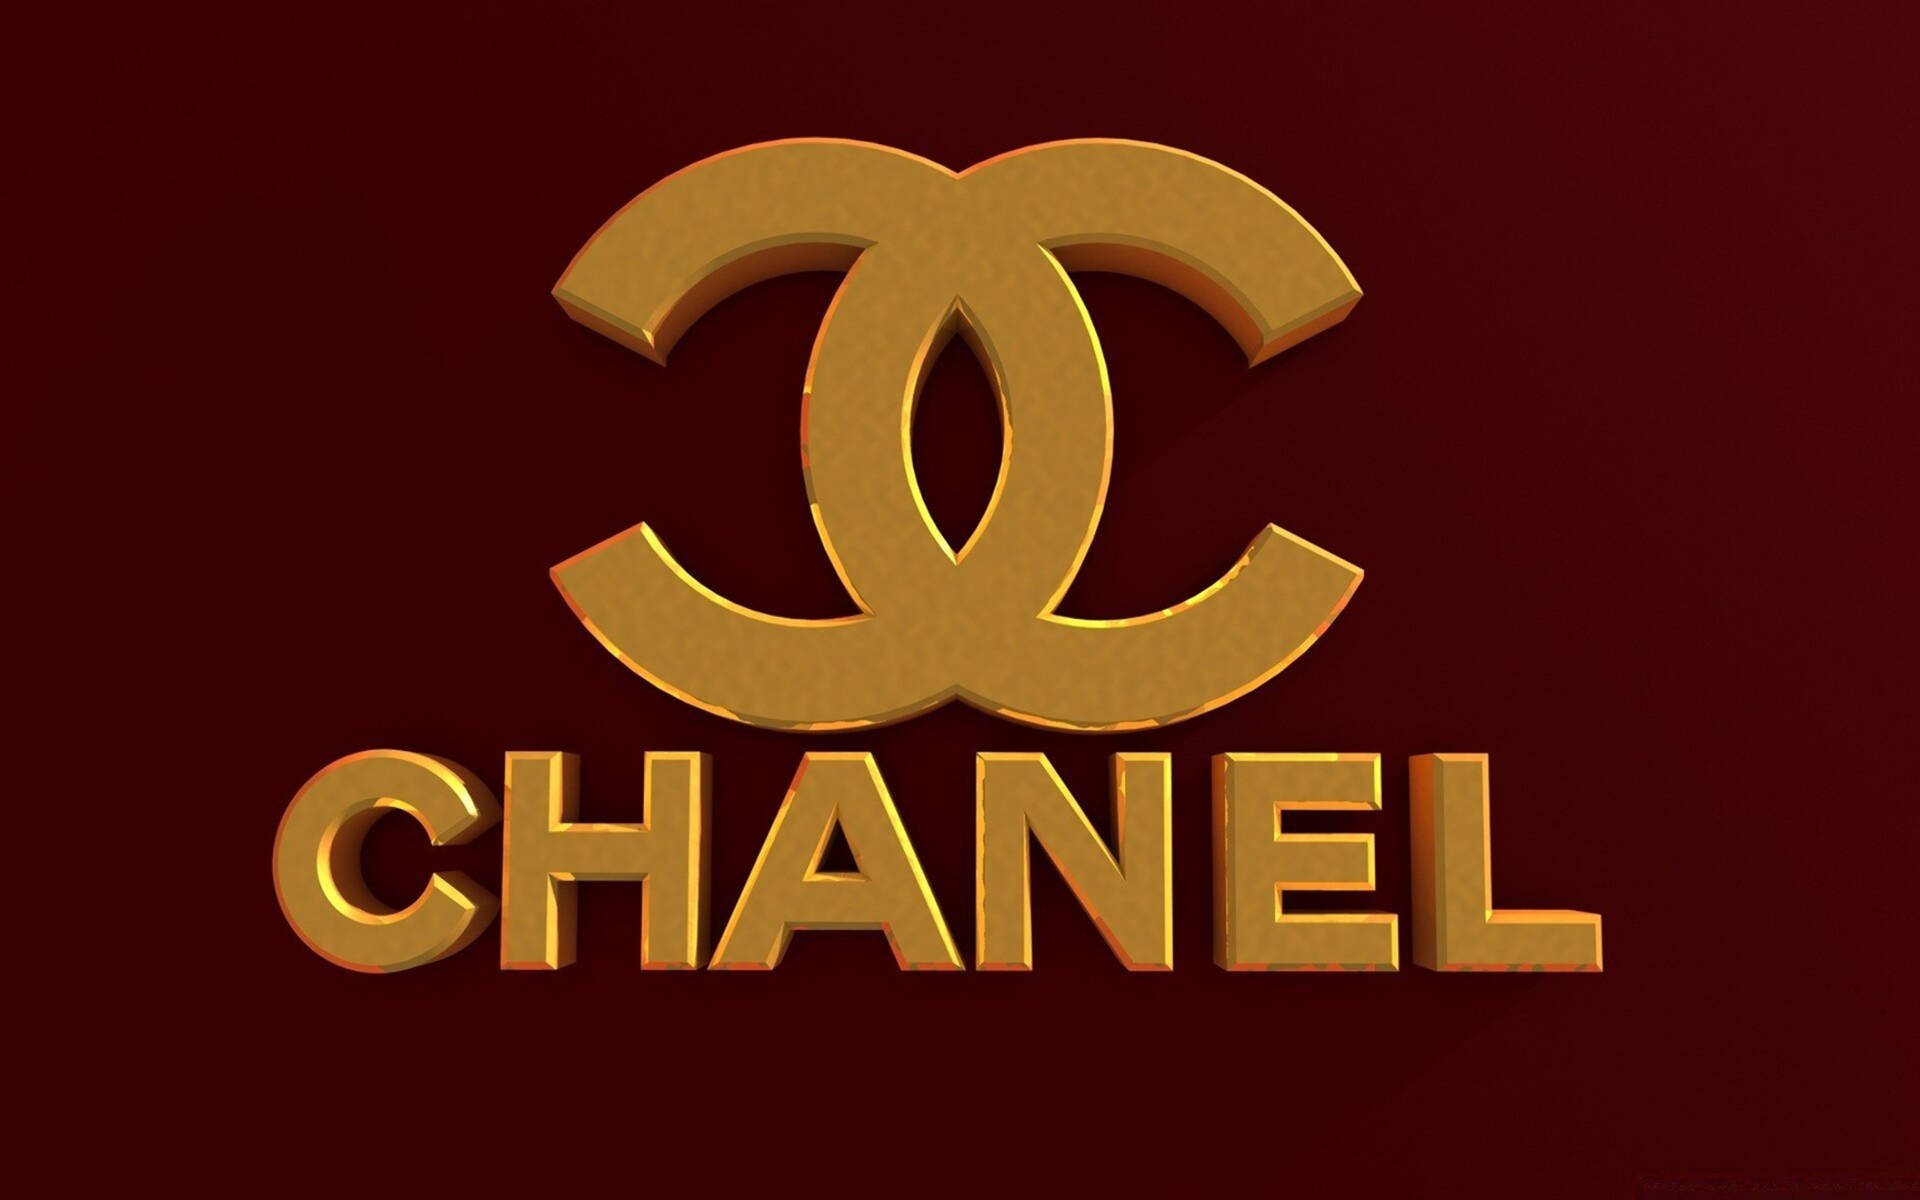 Iconic Chanel Logo on Maroon Background Wallpaper